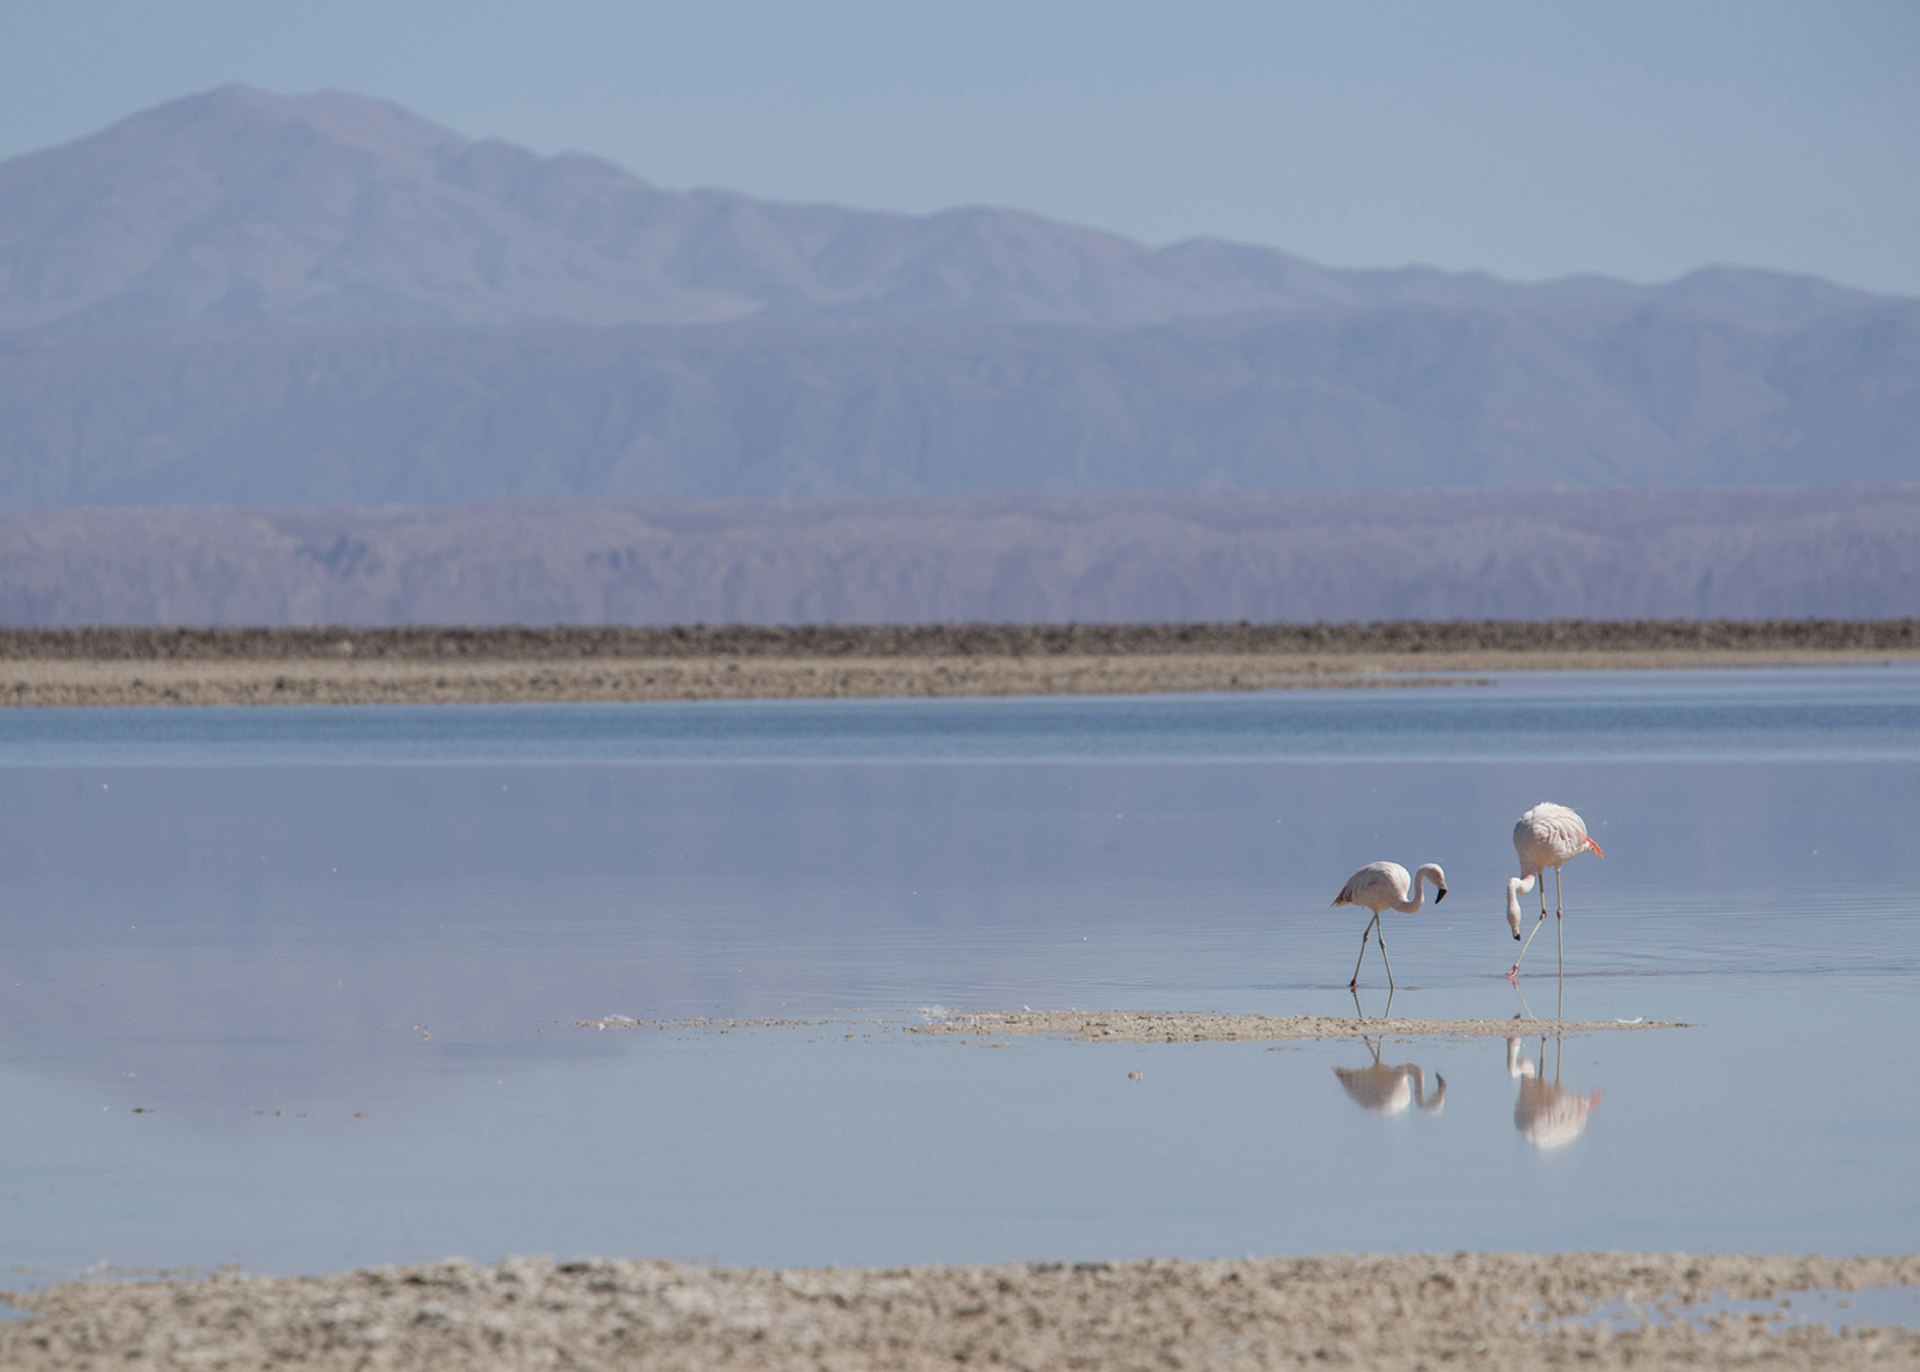 Flamingos feeding in a lake in the Atacama Desert, Chile © Philip Lee Harvey / Lonely Planet